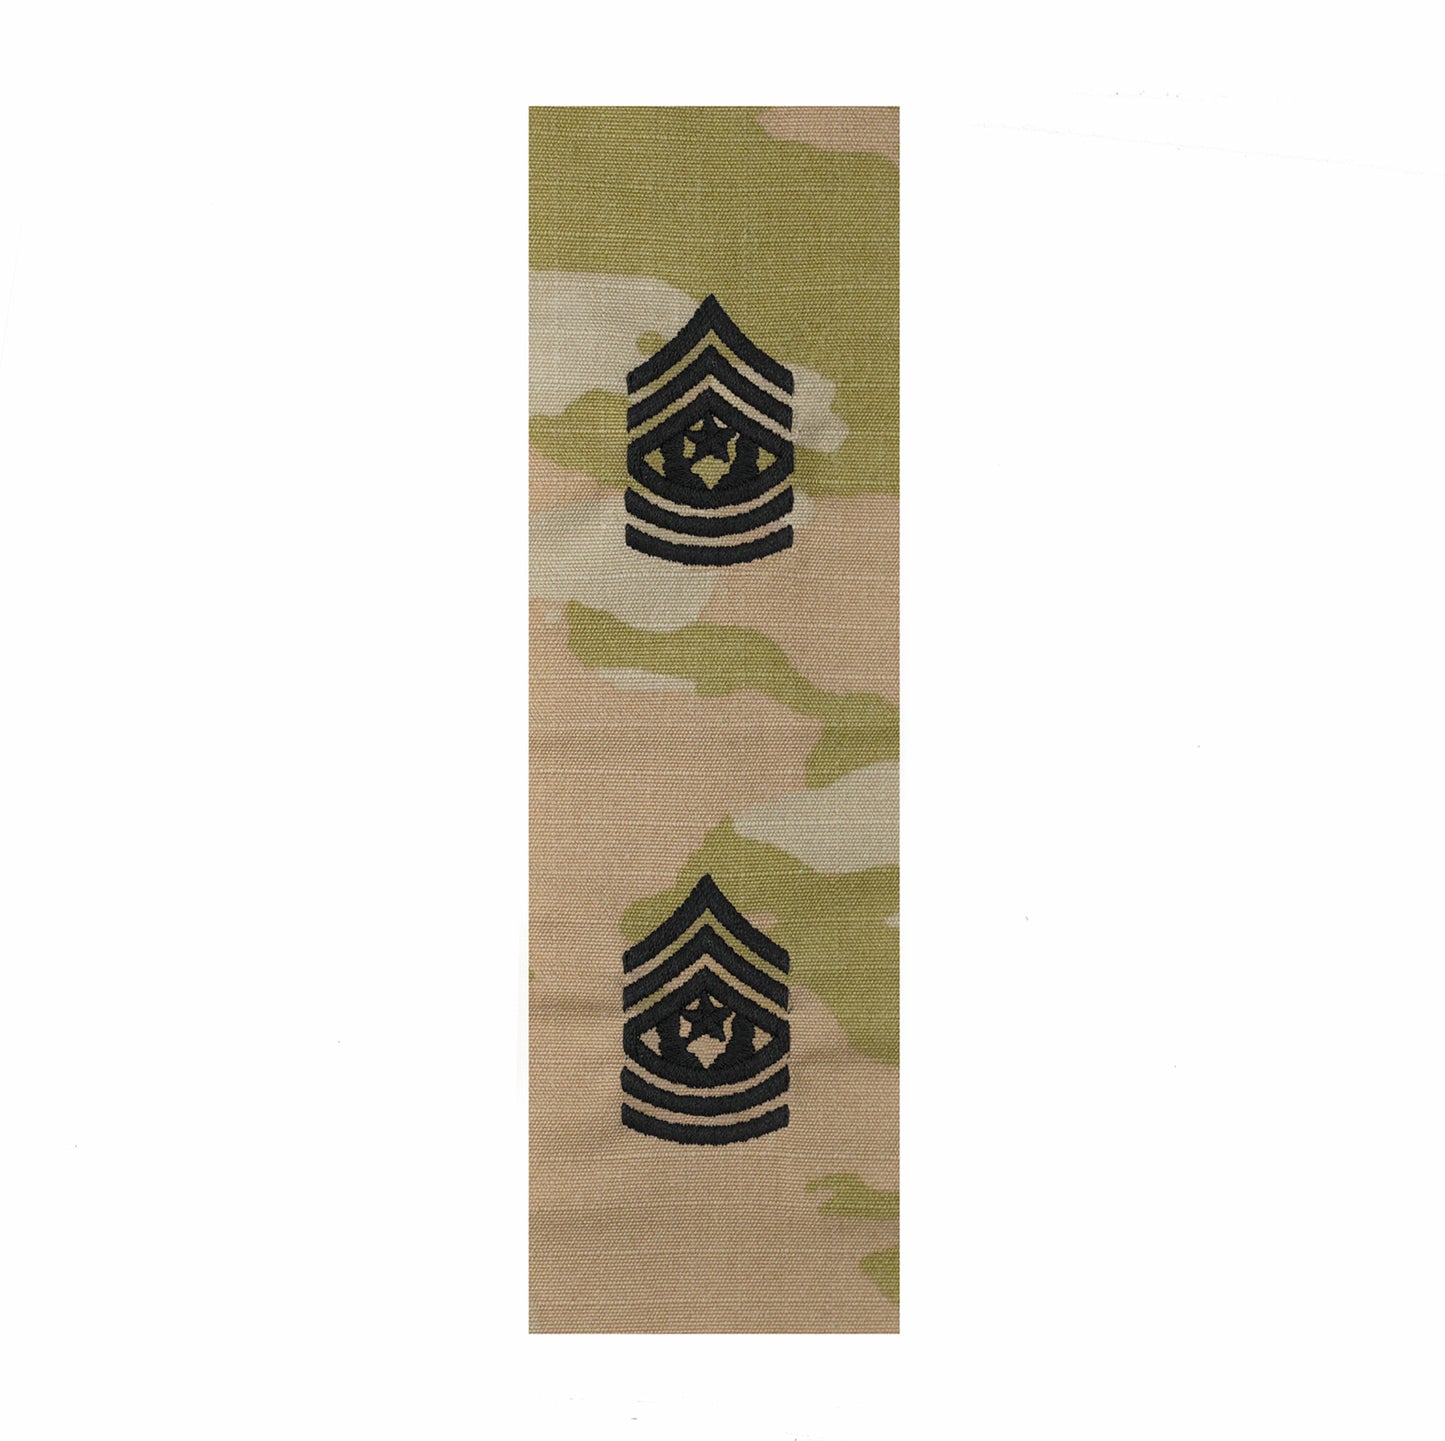 US Army E9 Command Sergeant Major OCP Sew-on for Cap “Only” (pair)